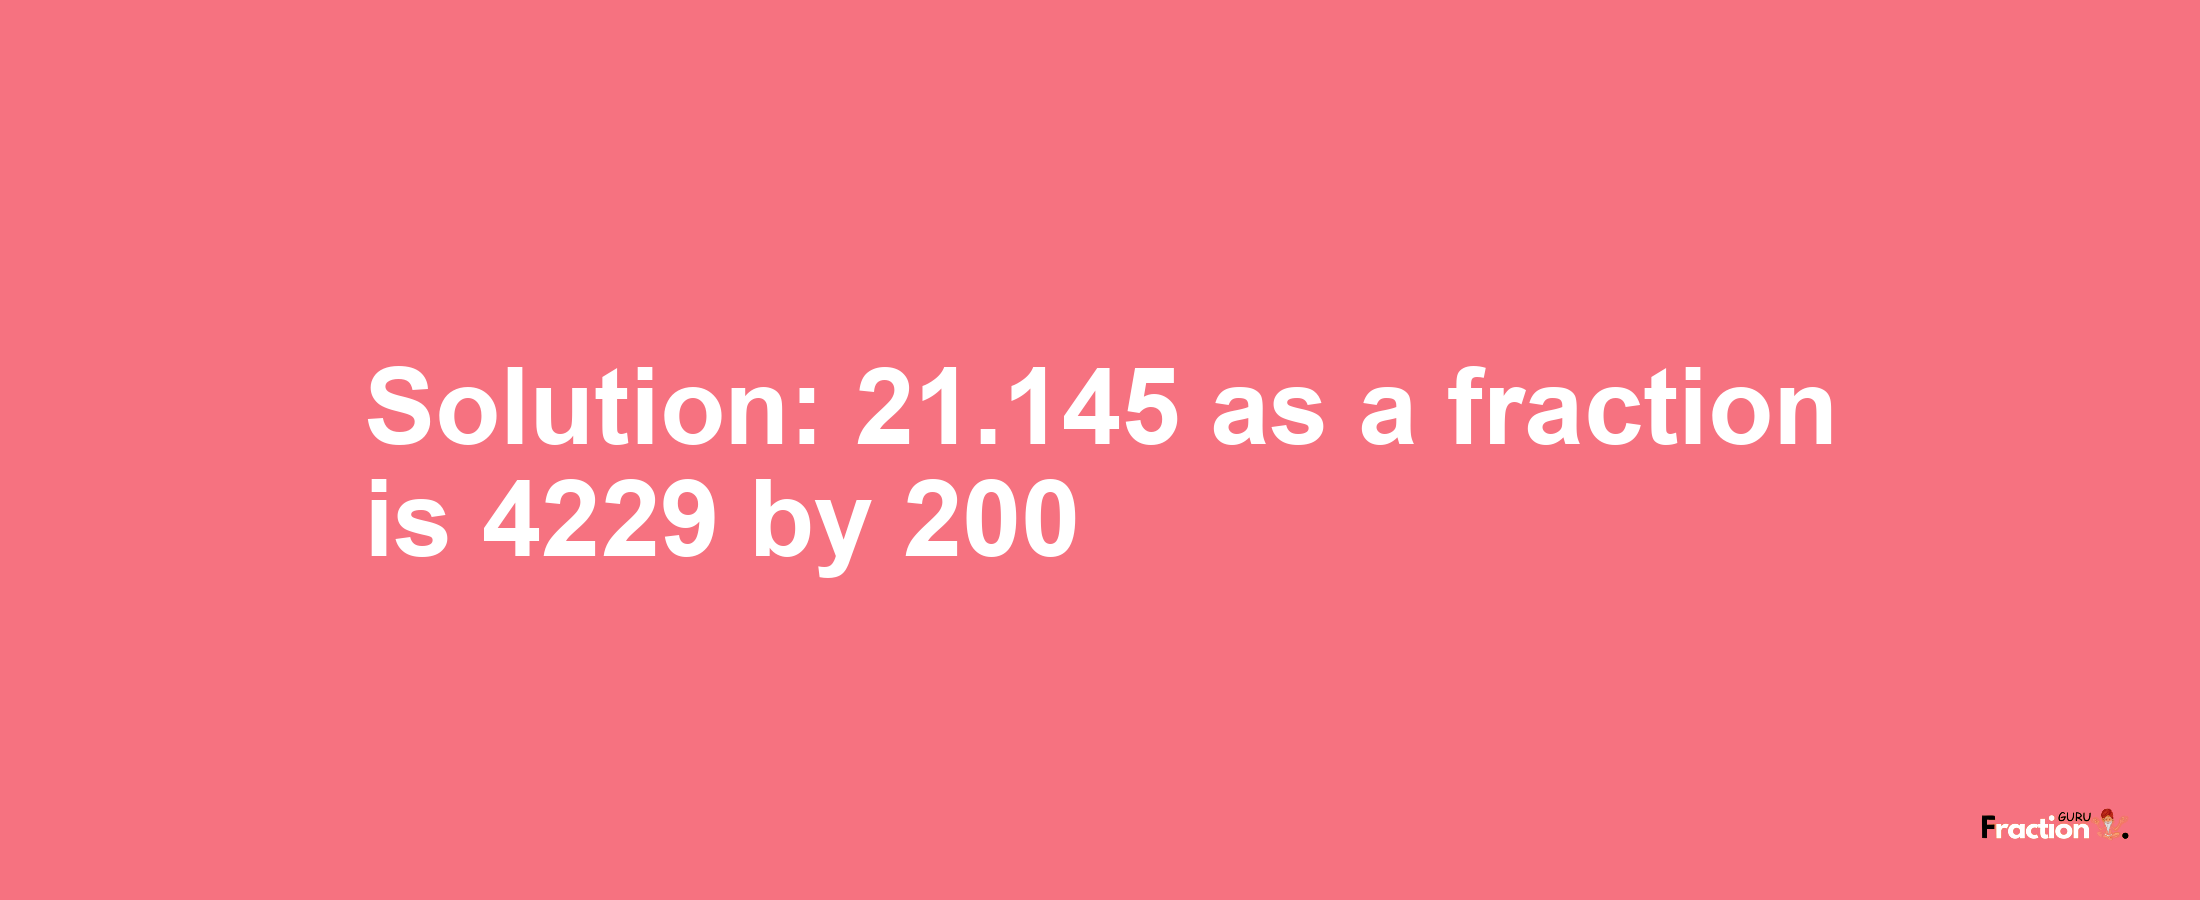 Solution:21.145 as a fraction is 4229/200